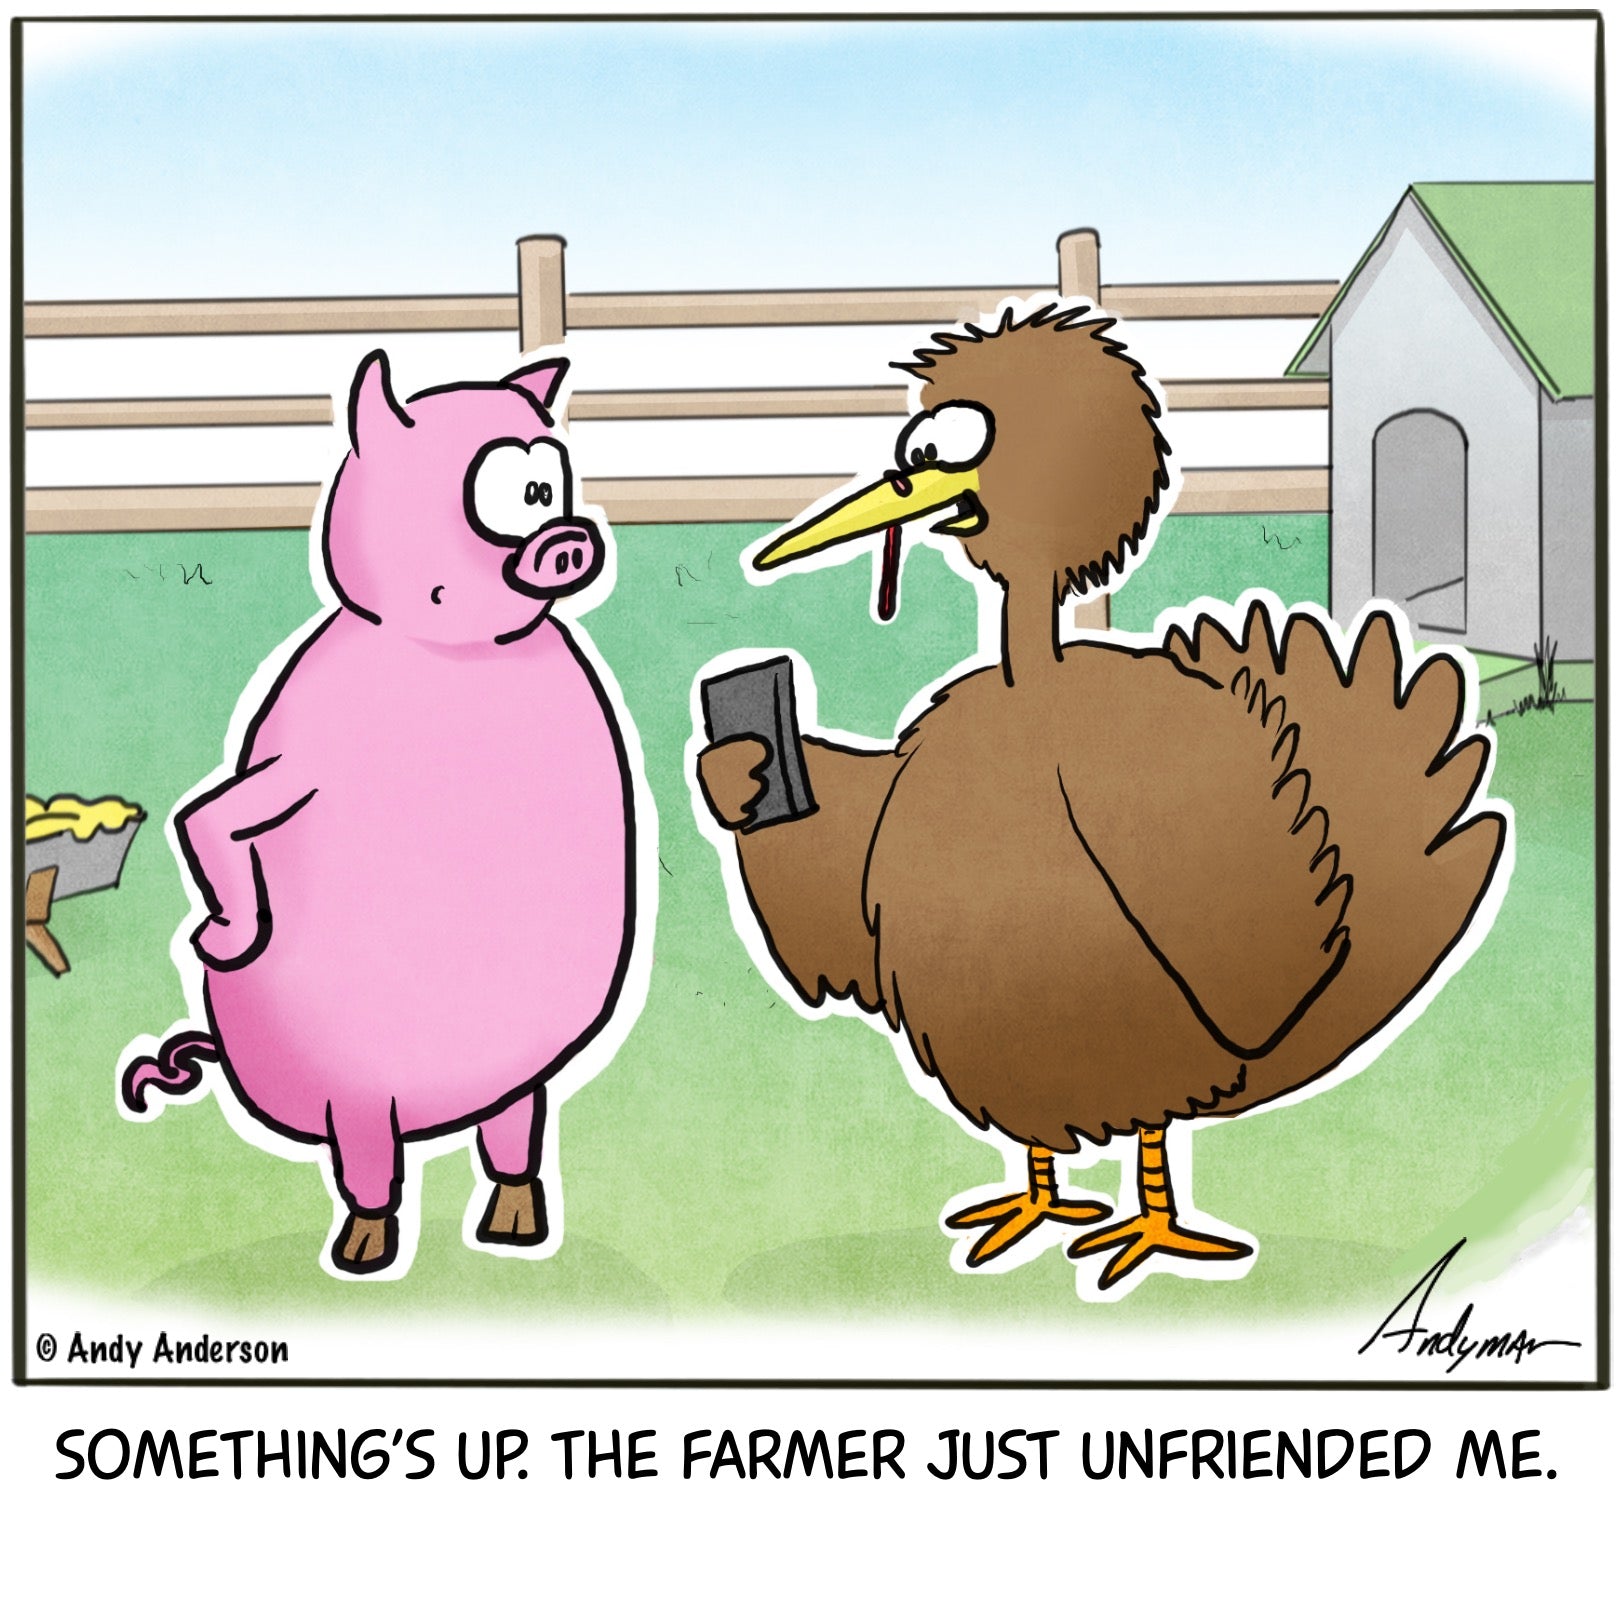 Cartoon about a farmer unfriending a turkey before Thanksgiving by Andy Anderson